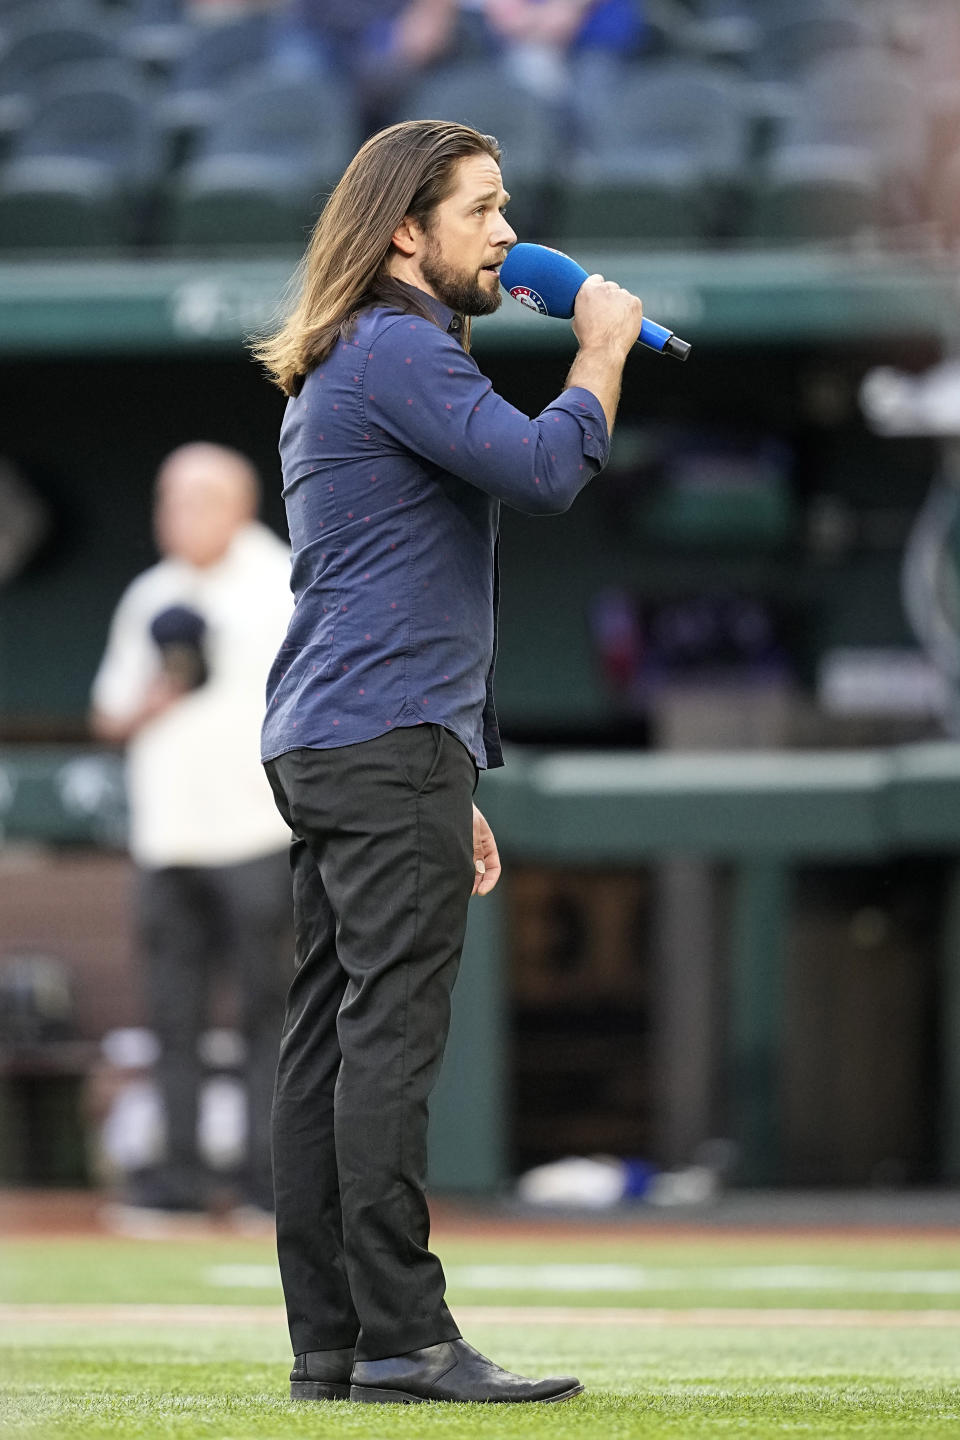 Tim Urban sings the national anthem before a baseball game between the Oakland Athletics and the Texas Rangers, Friday, April 21, 2023, in Arlington, Texas. (AP Photo/Tony Gutierrez)